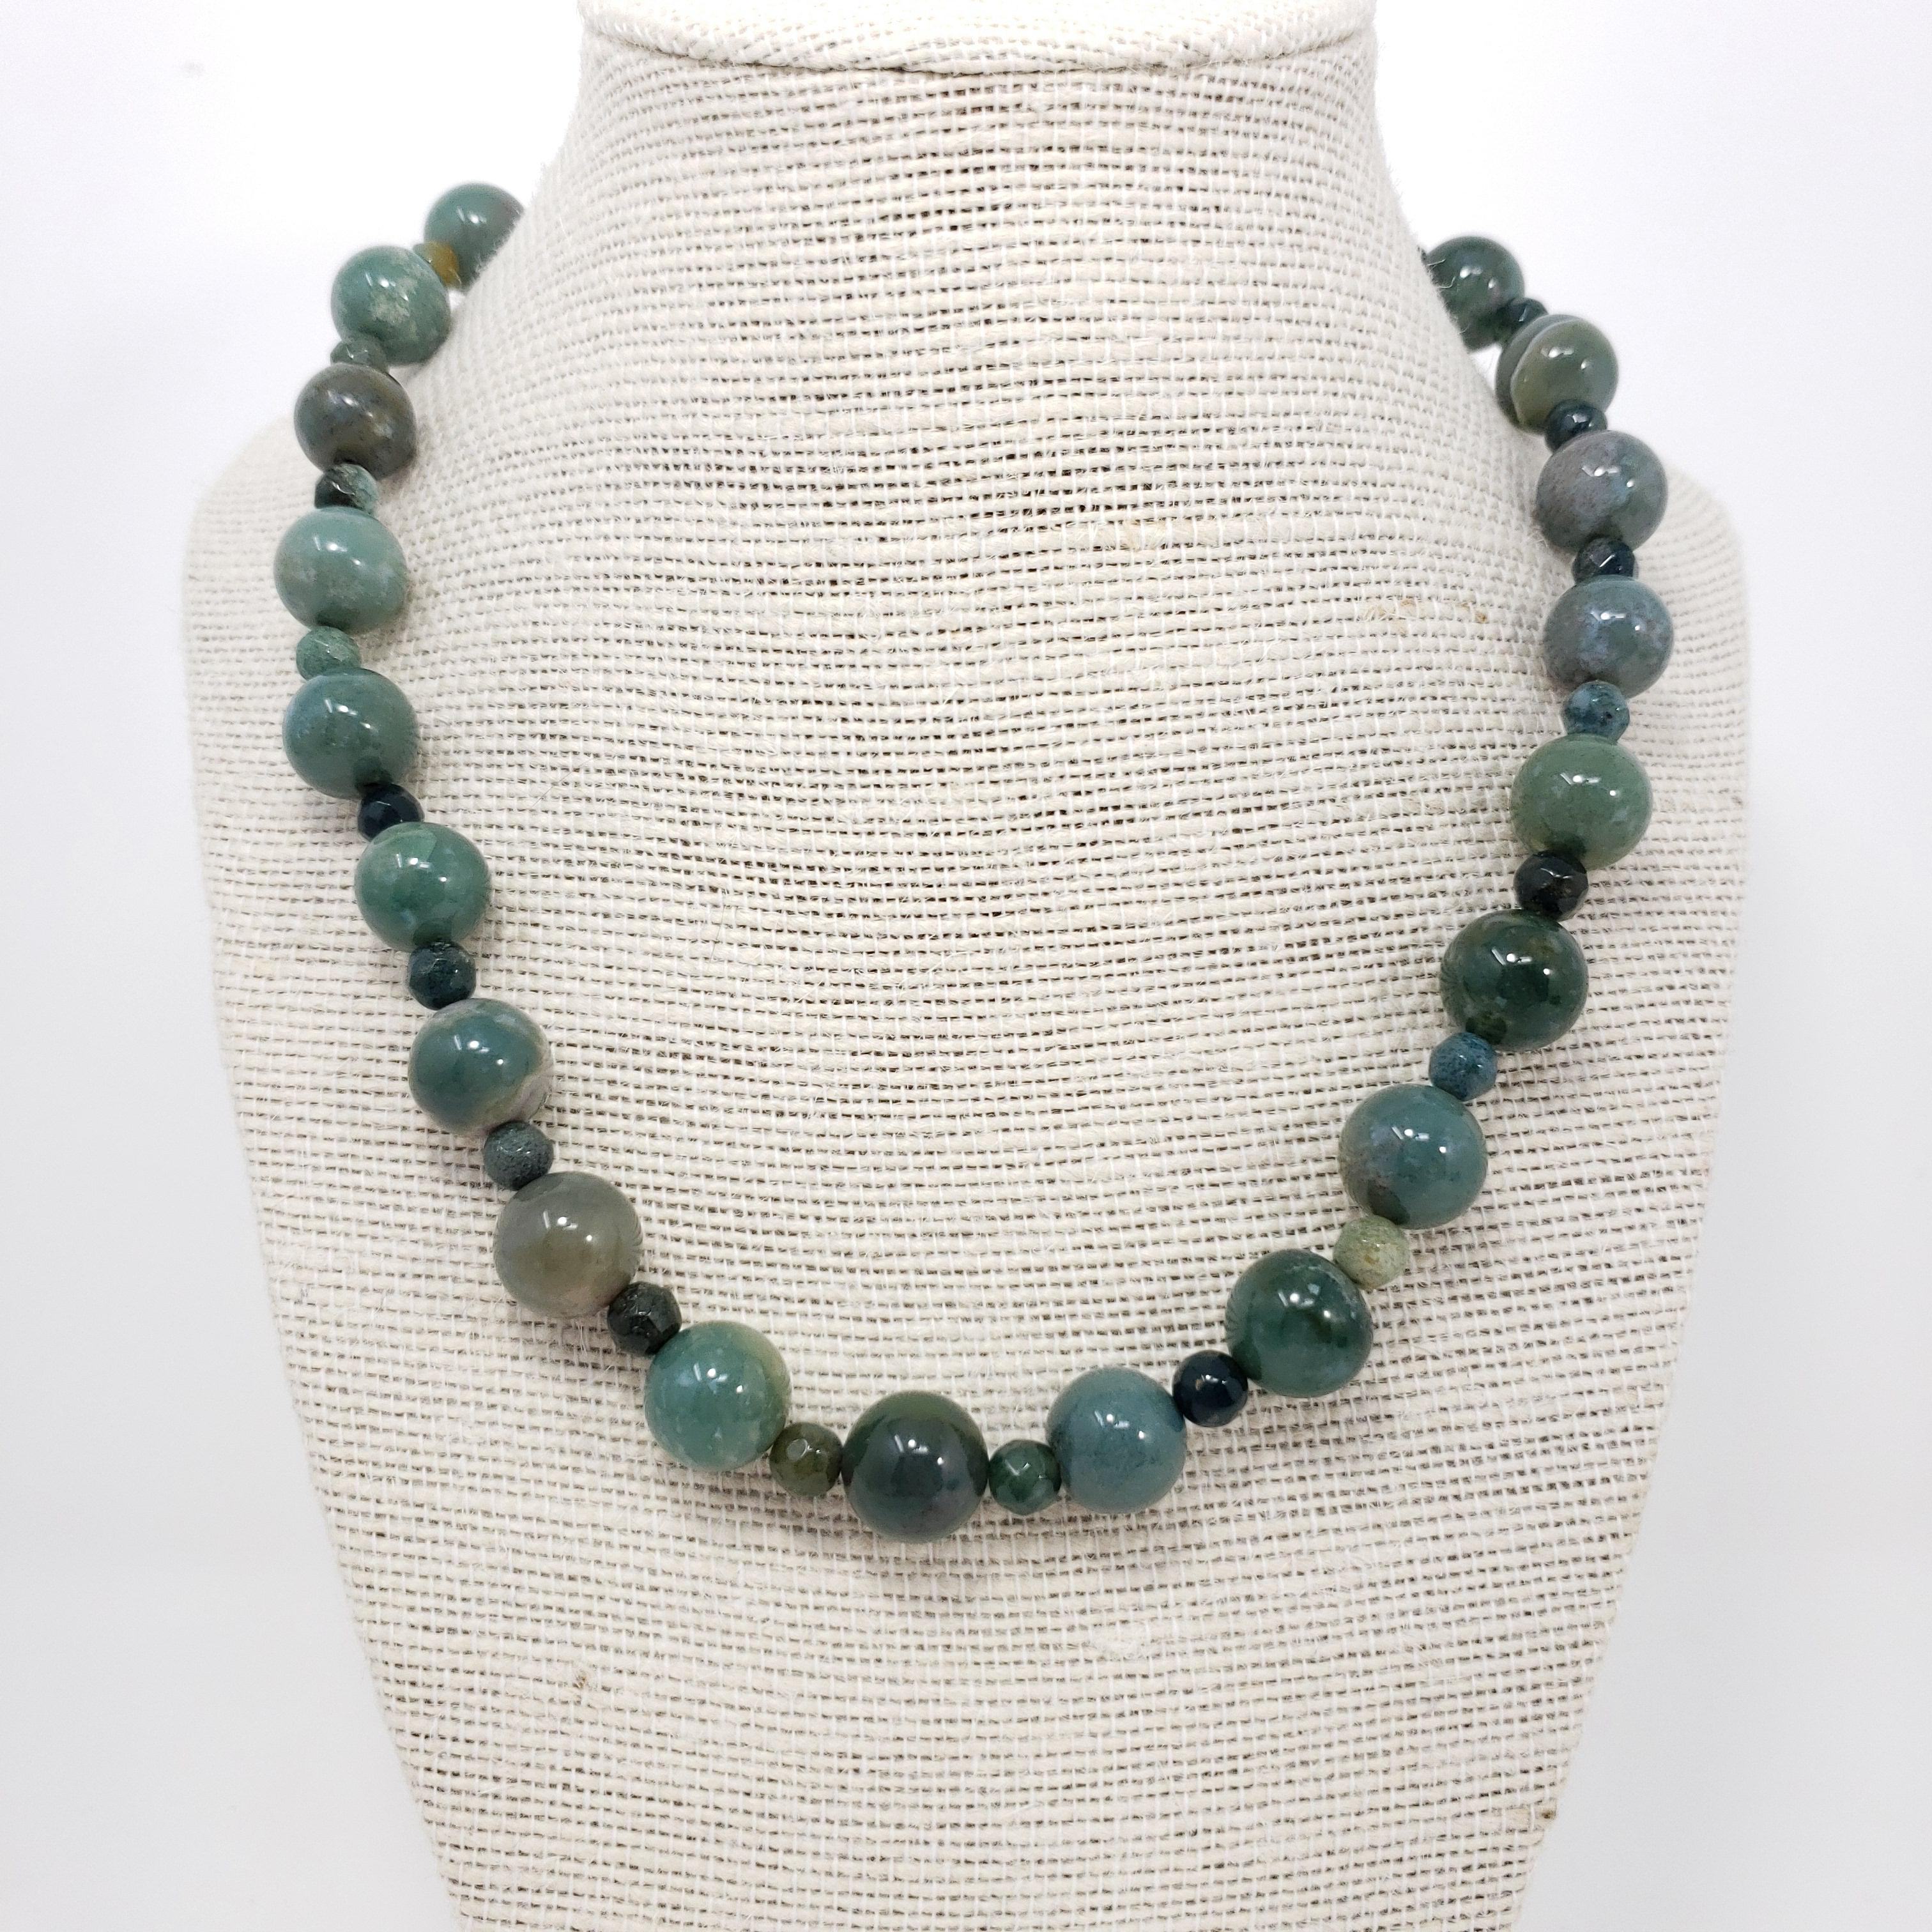 A sophisticated jade bead necklace, featuring alternating polished and faceted jade beads fastened with a vintage, sterling silver, hook clasp.